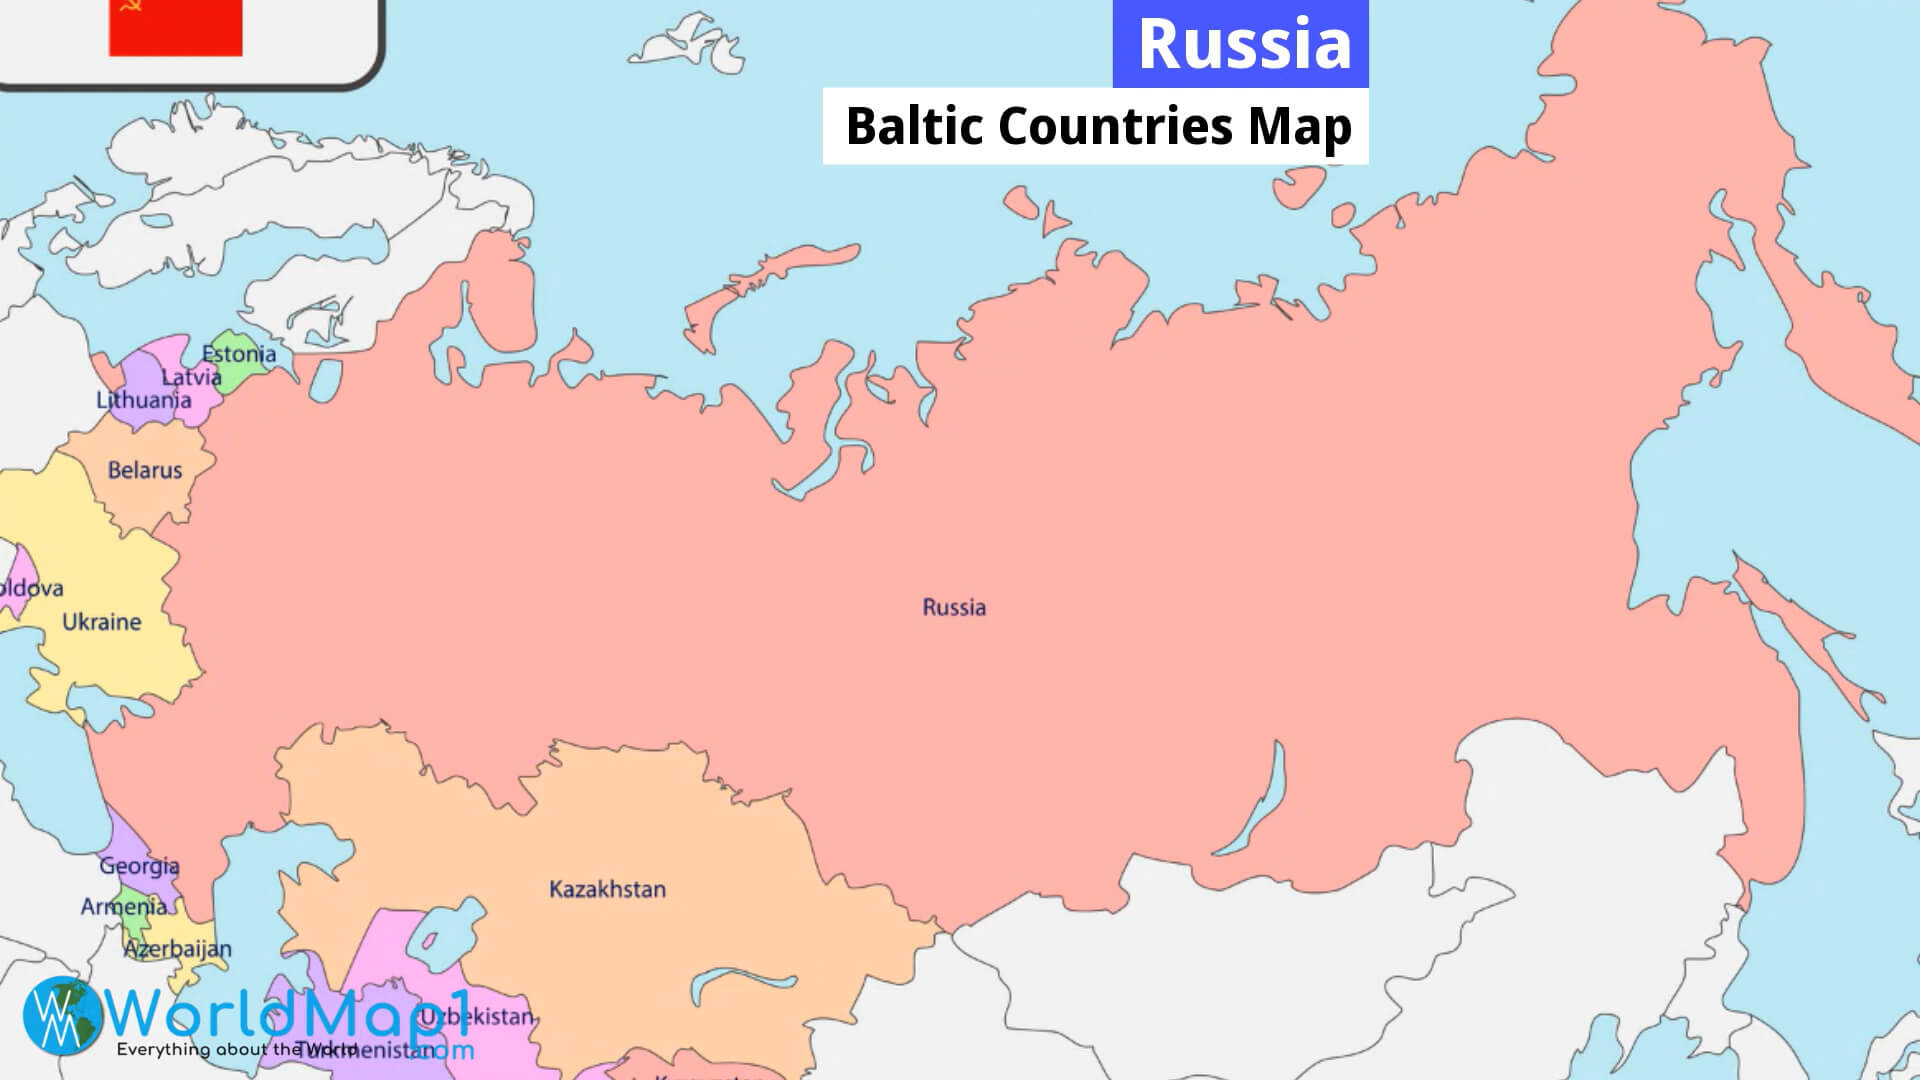 Russia and Baltic Countries Map